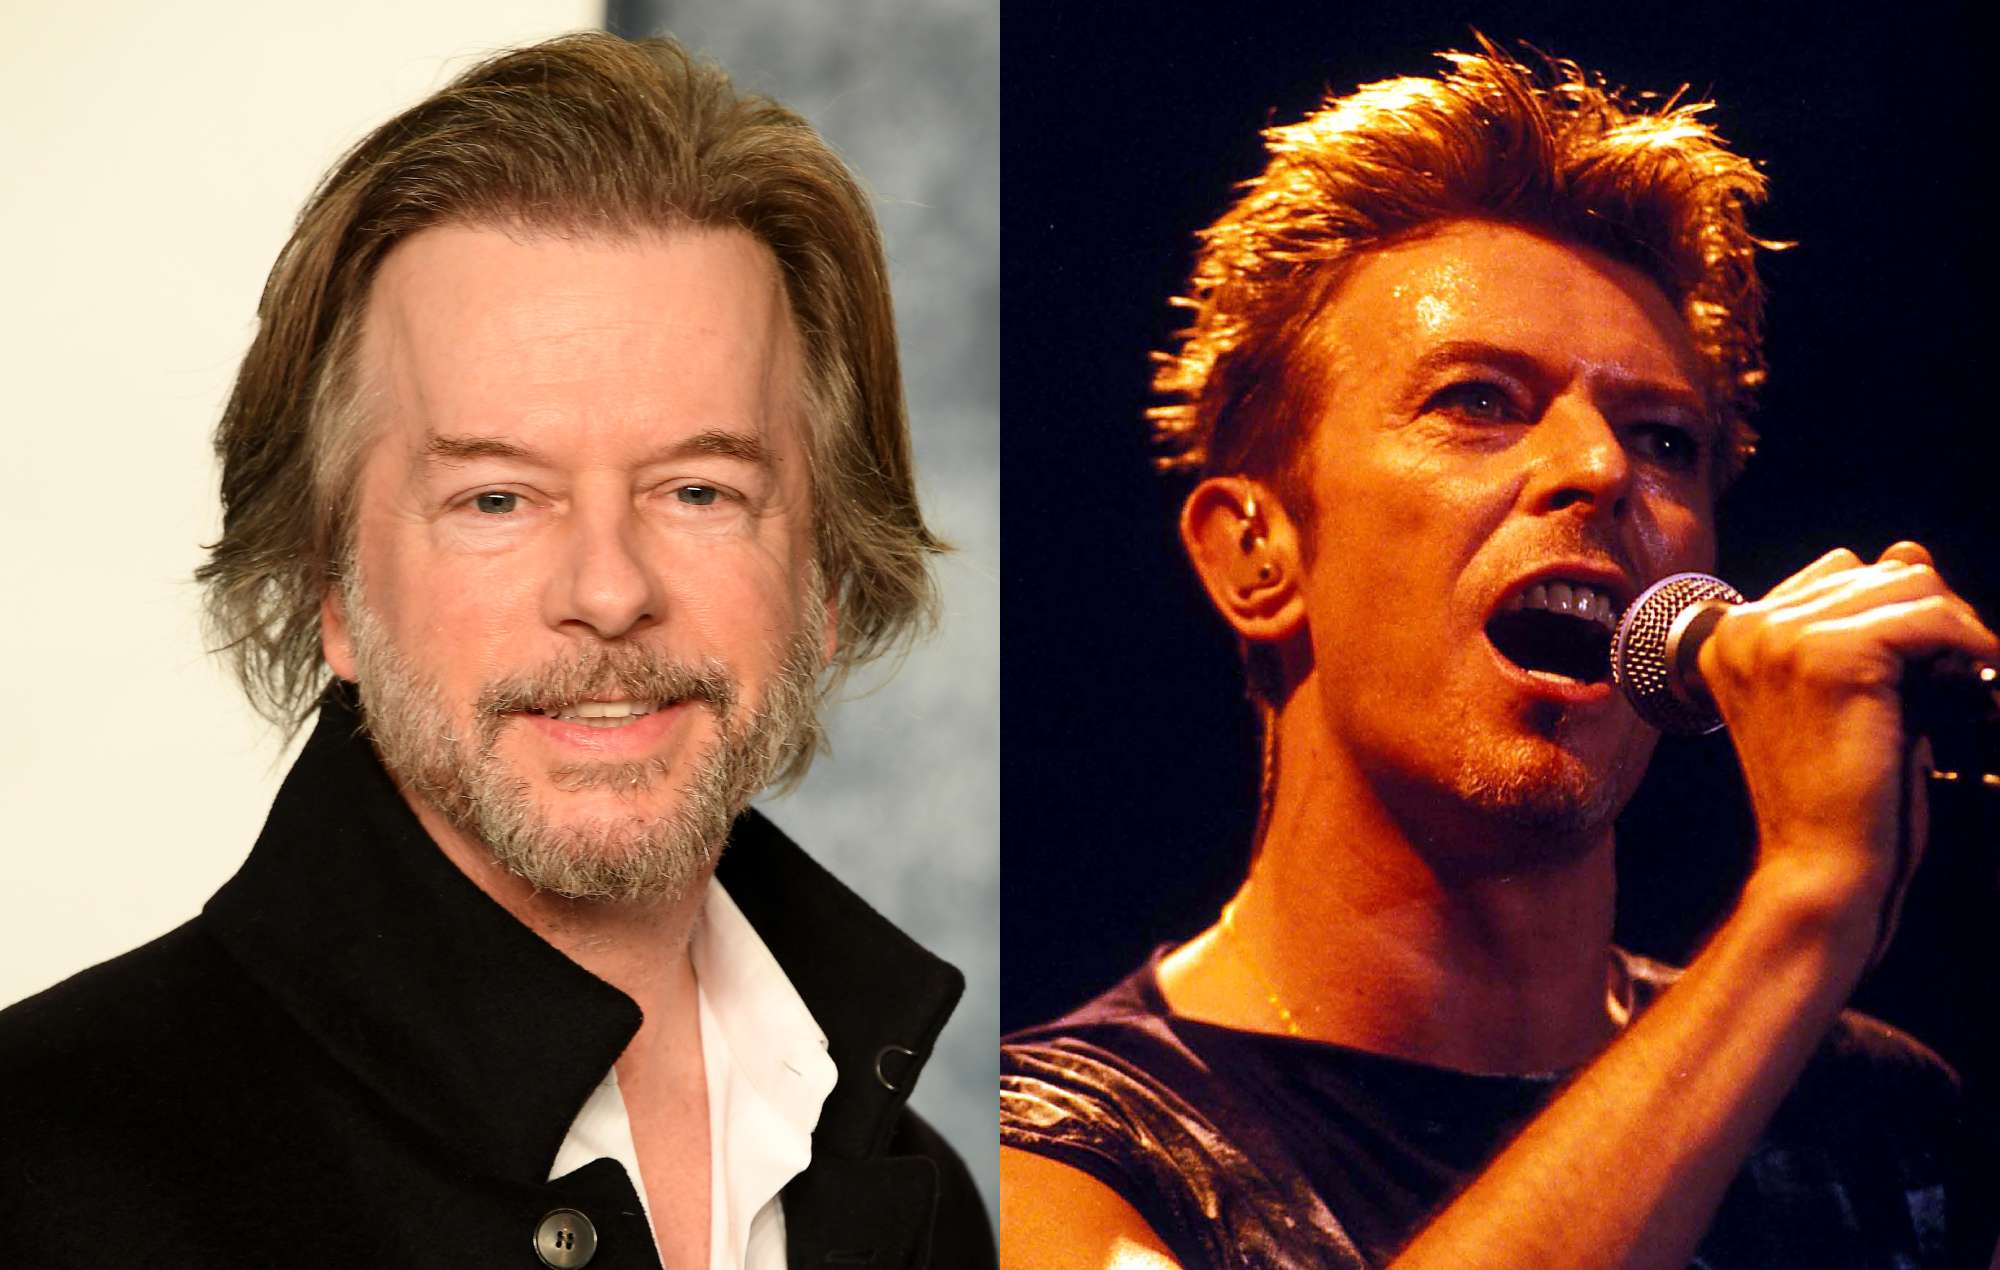 David Spade turned down suggestion from David Bowie for ‘SNL’ sketch